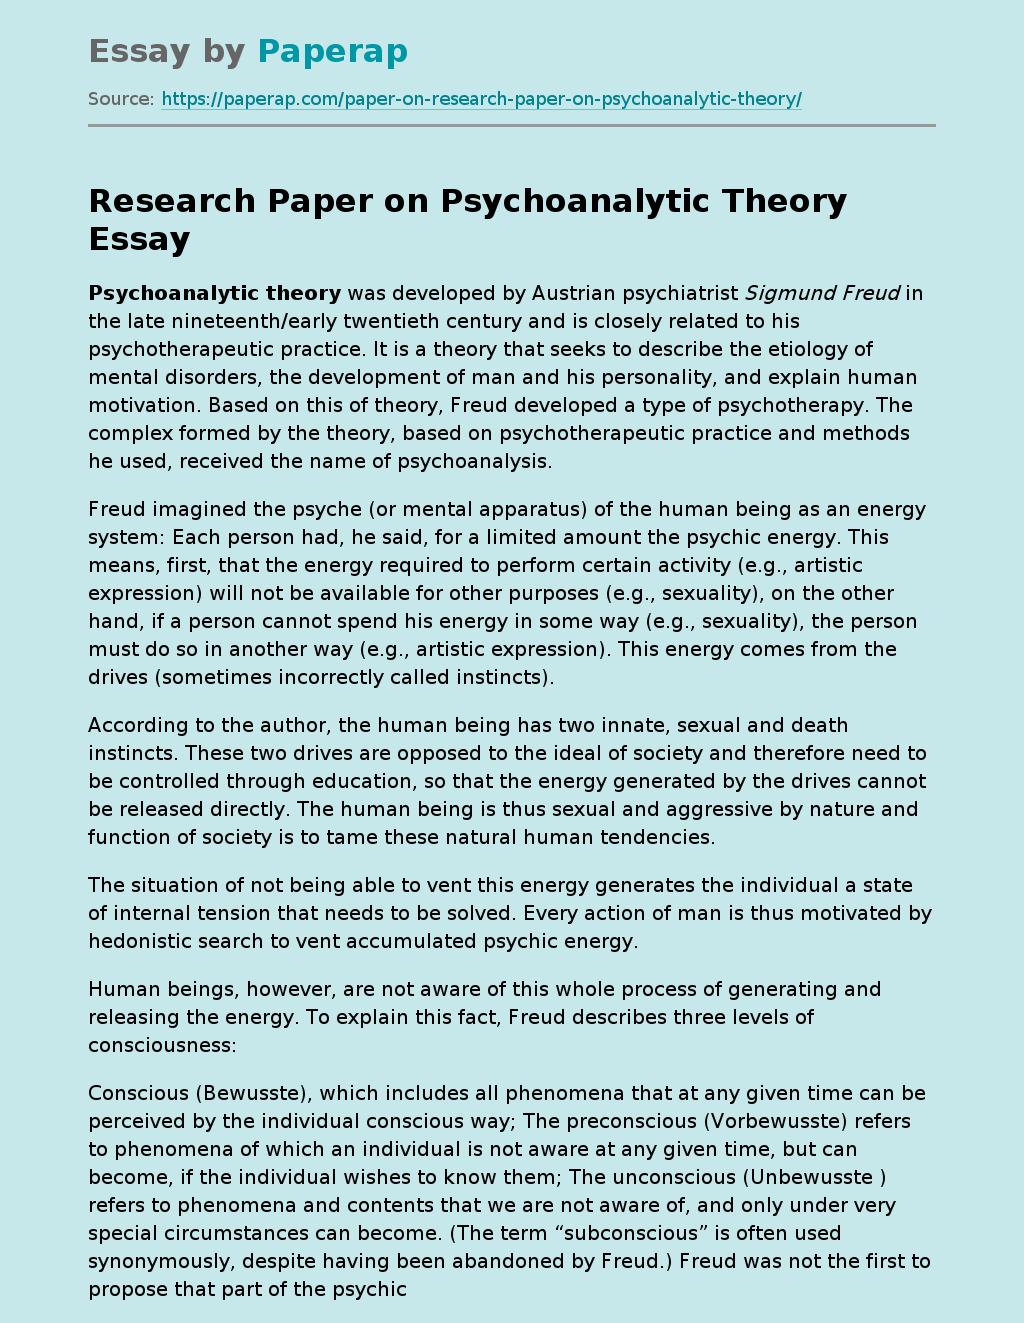 Research Paper on Psychoanalytic Theory